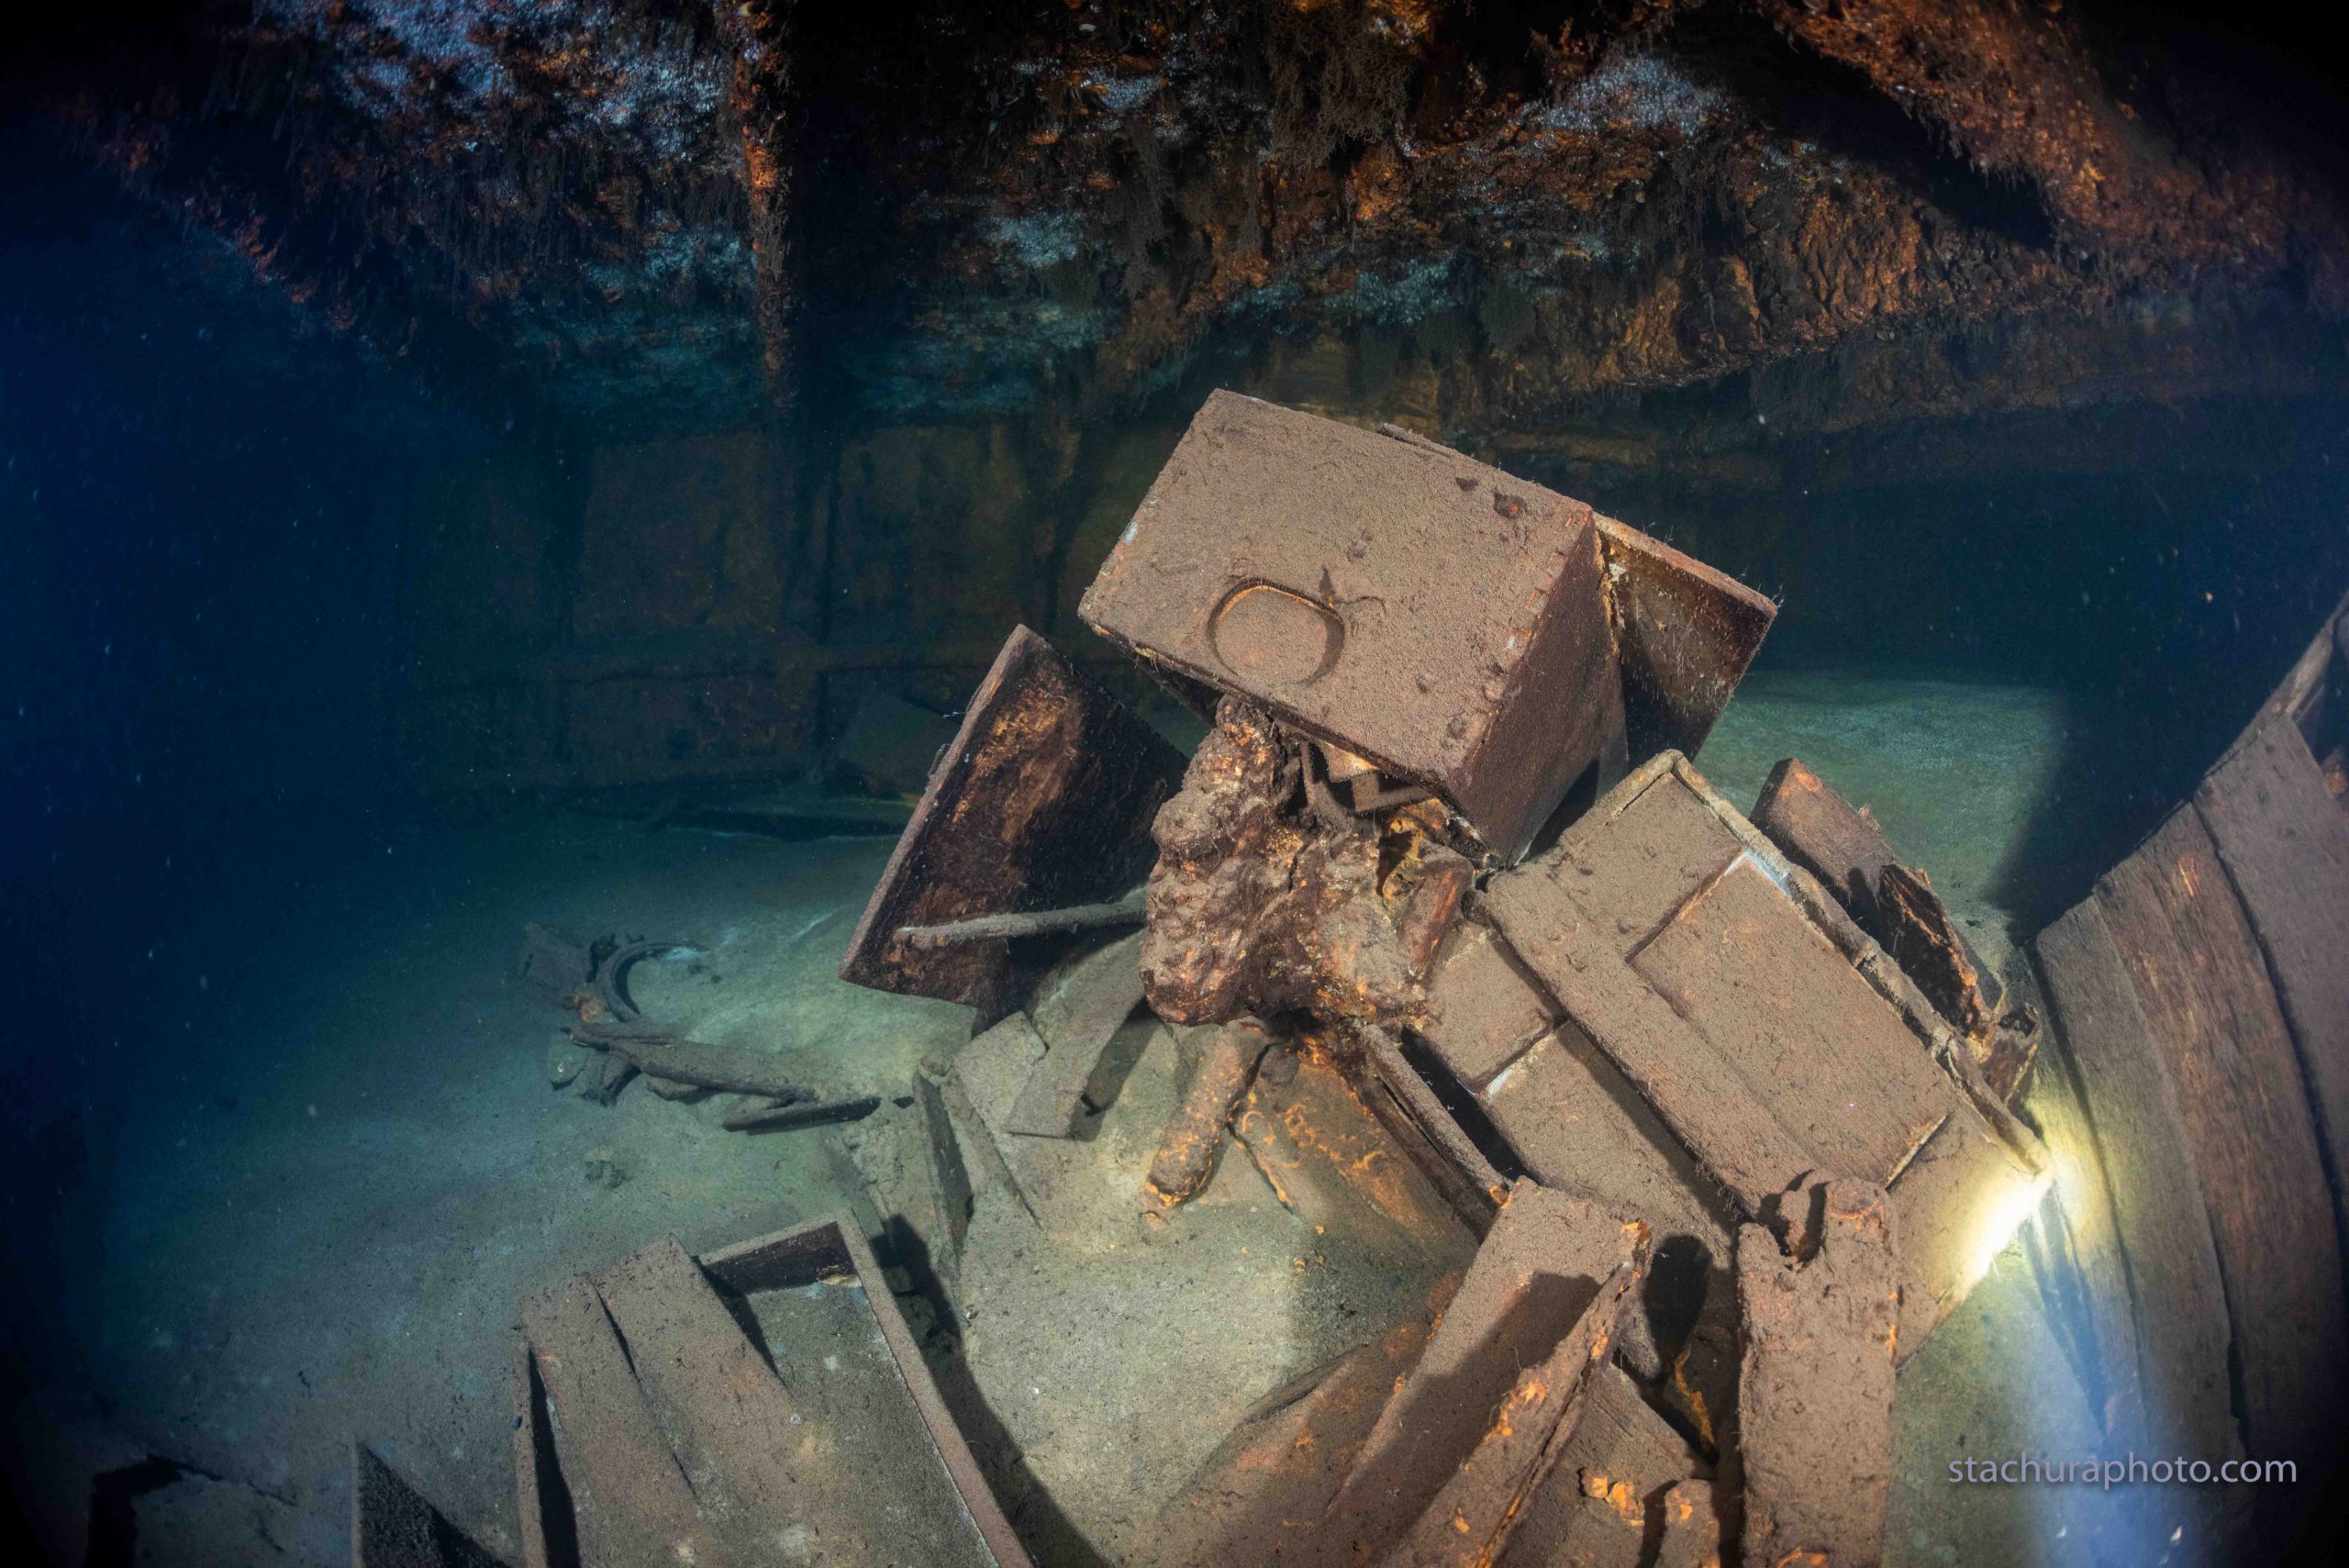 Some of the intriguing crate debris found on the shipwreck. (Photo: TOMASZ STACHURA / SANTI)